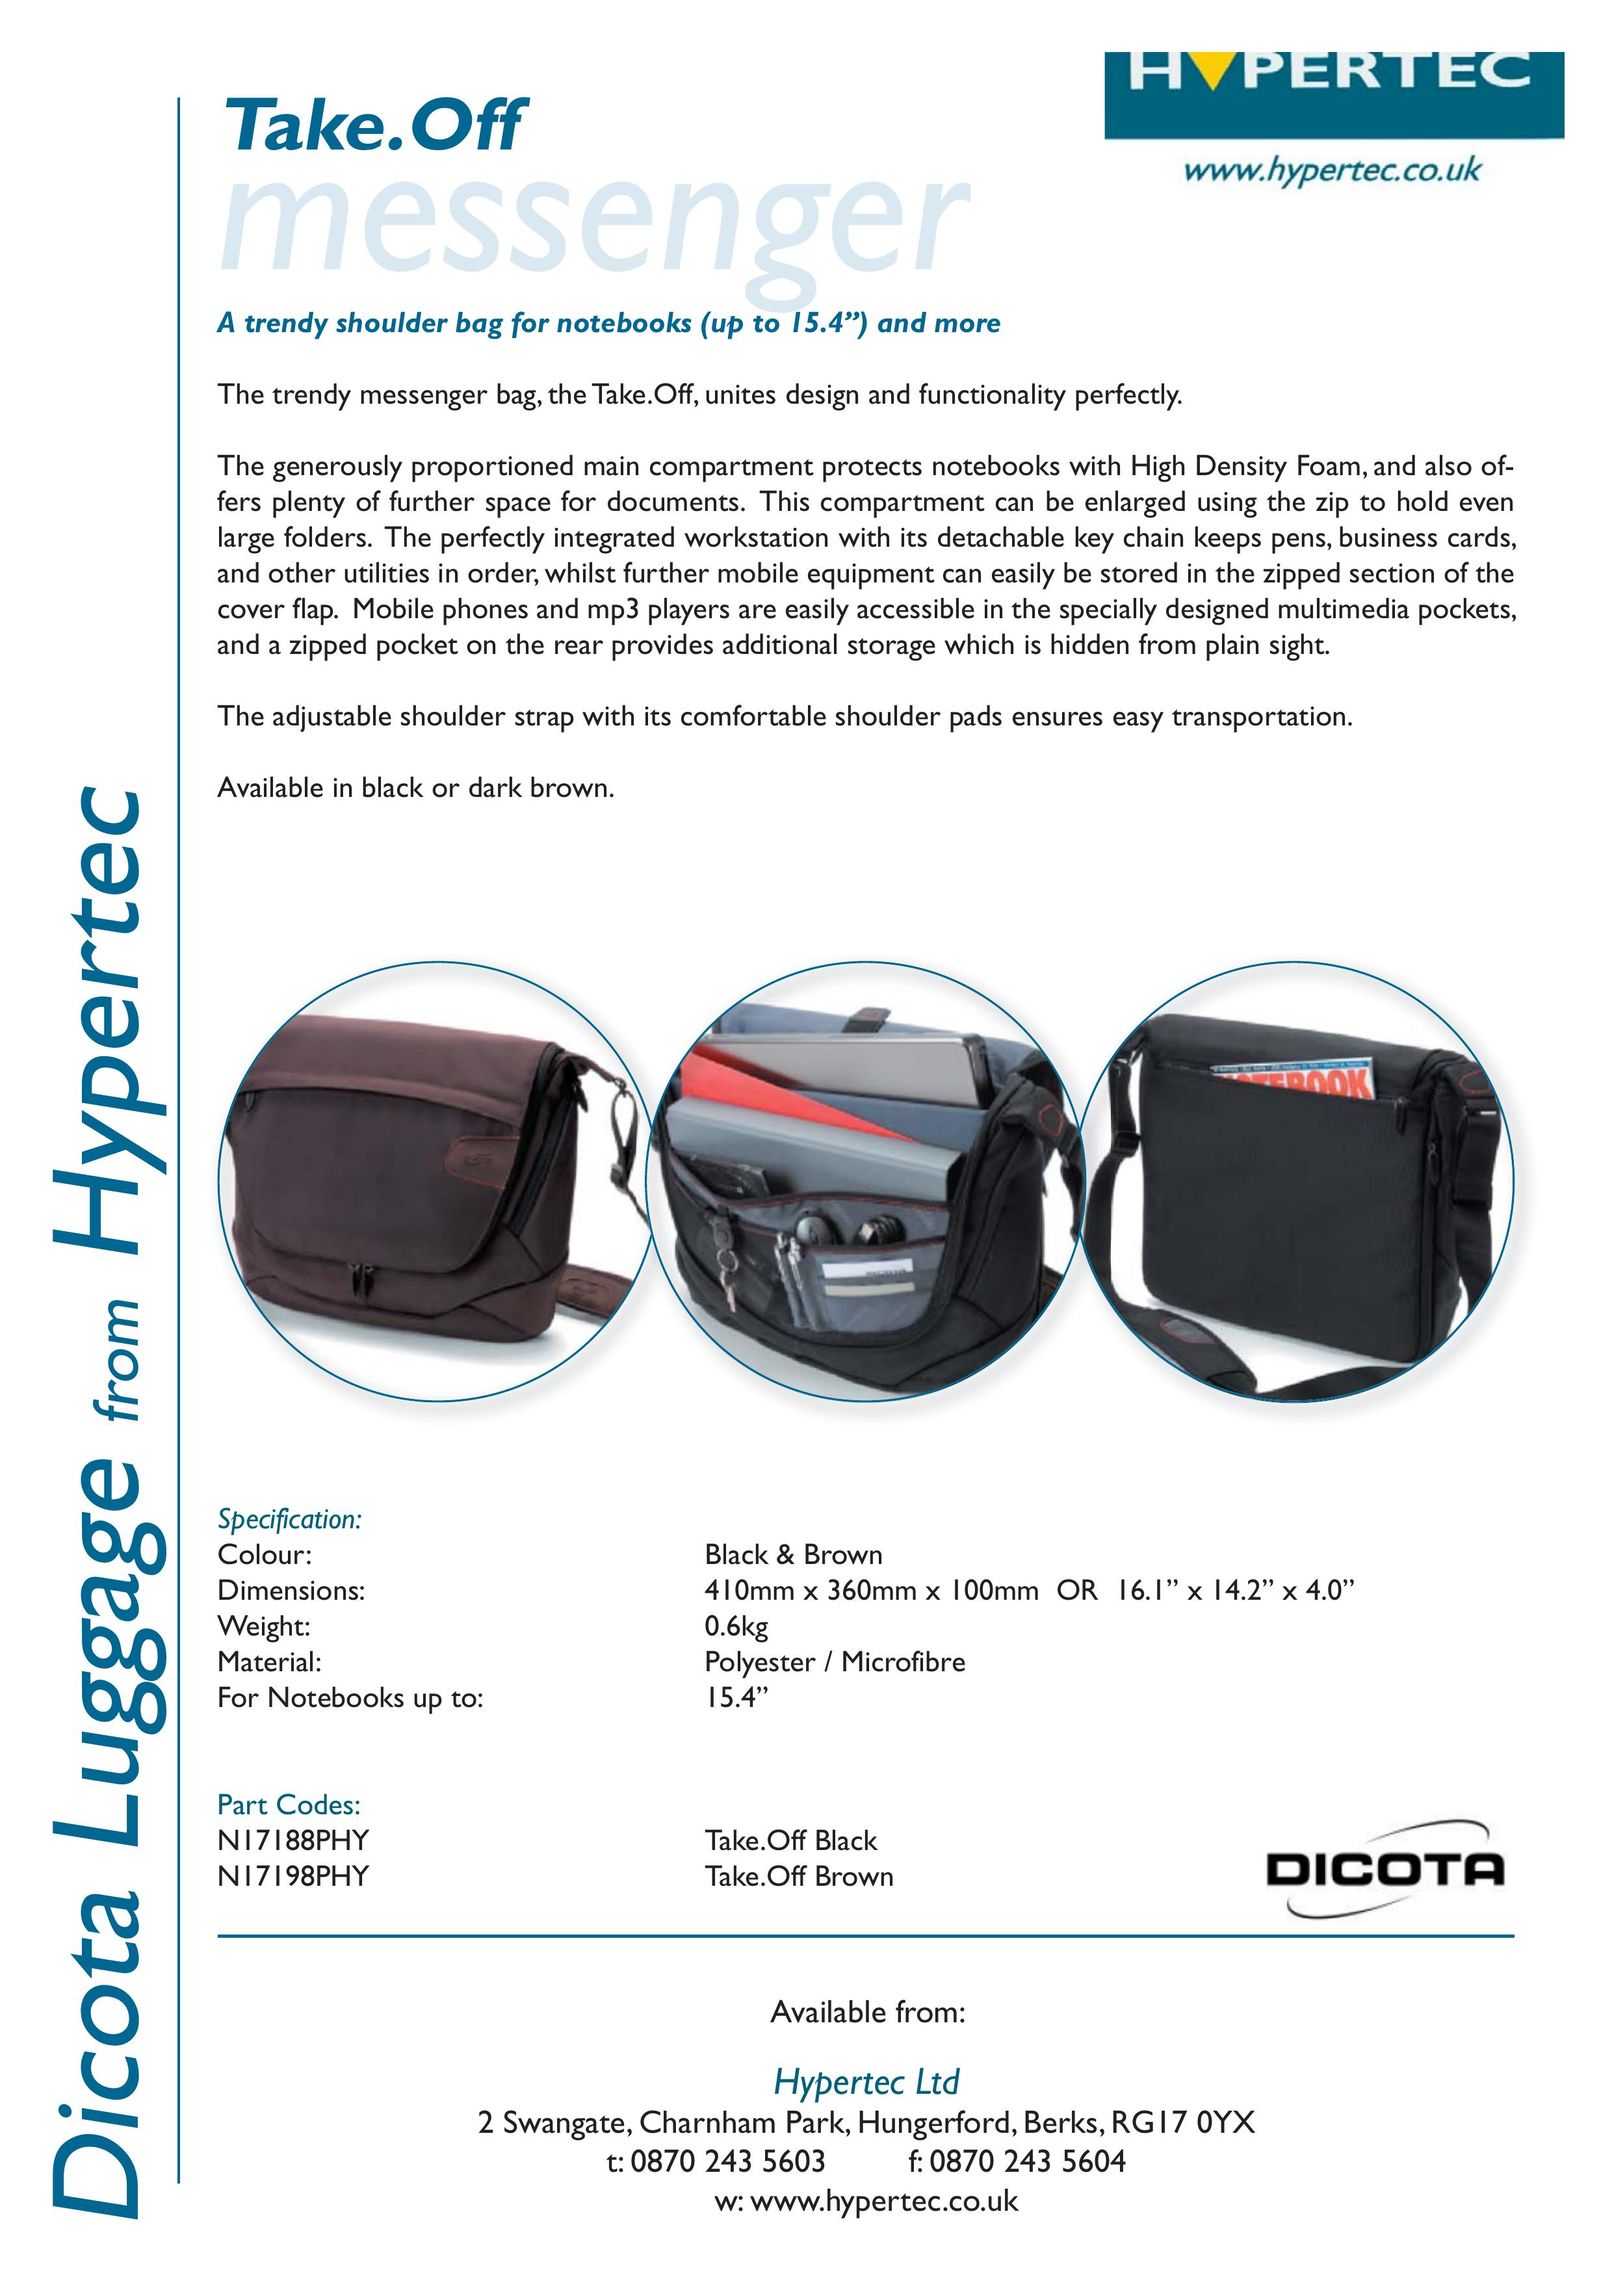 Dicota N17188PHY Carrying Case User Manual